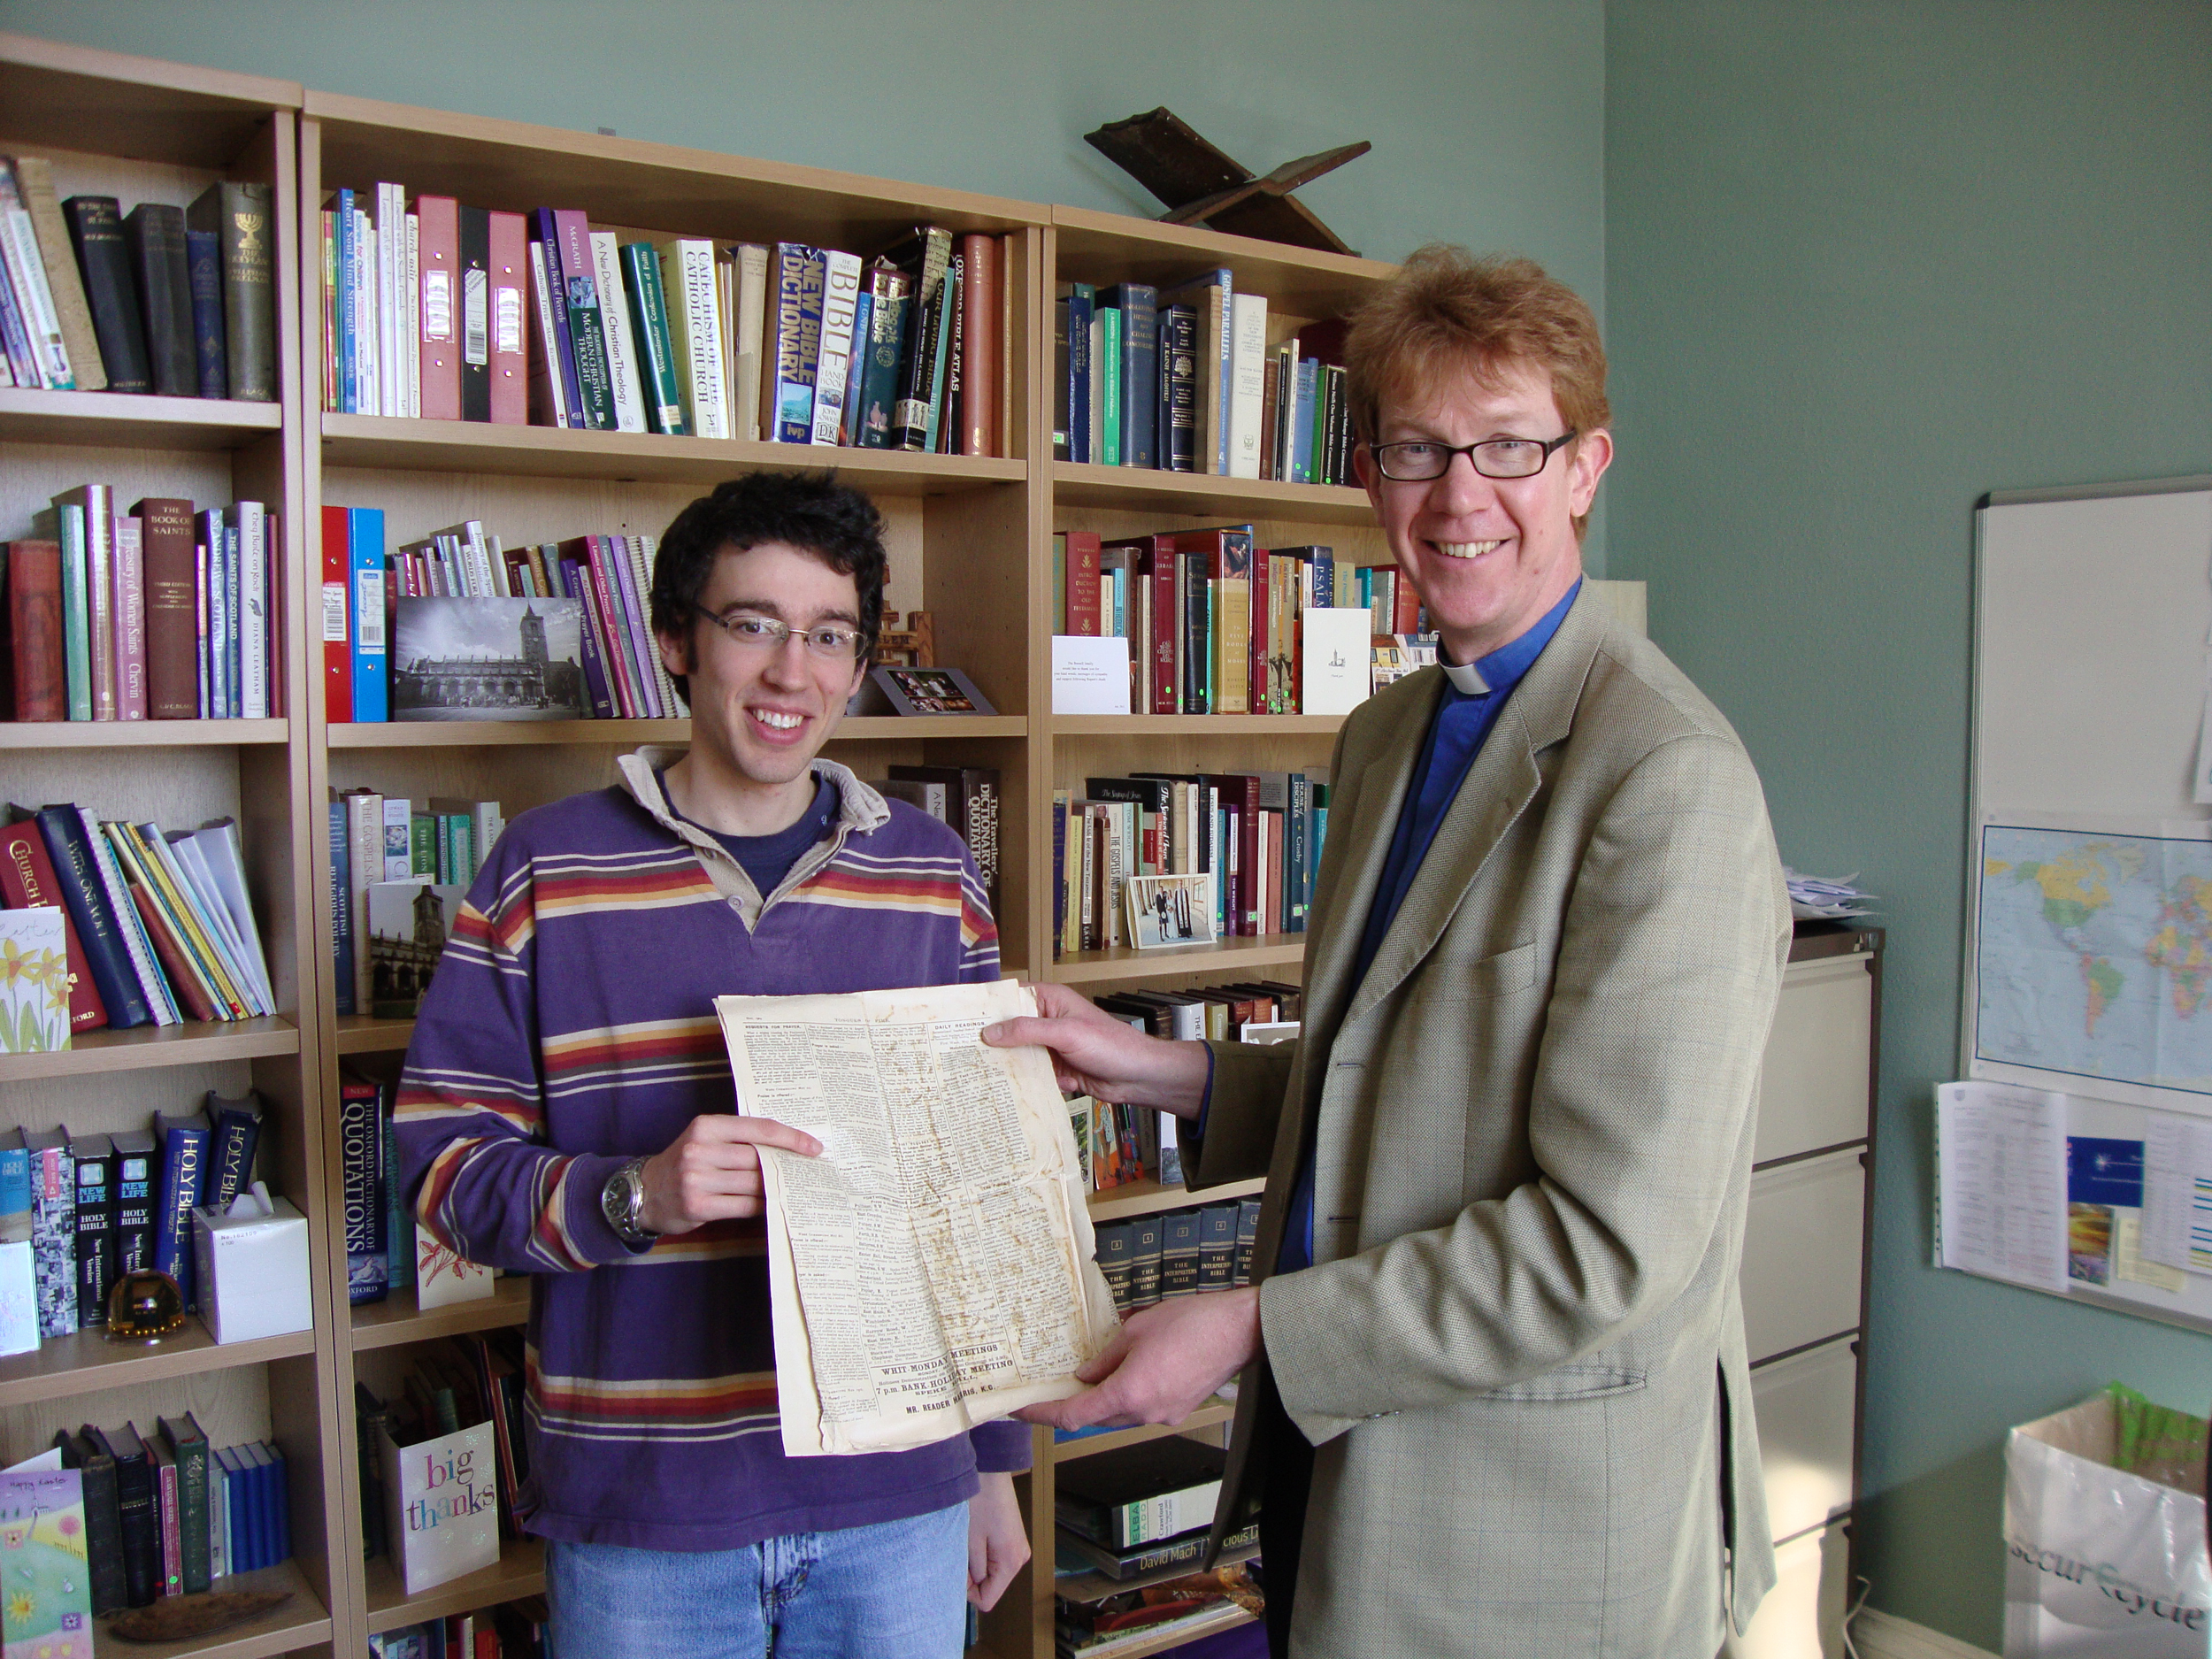 Peter Reader-Harris (left), great-great grandson of Richard Reader Harris, with University Chaplain Revd Dr Donald MacEwan (right) and the pages of Tongues of Fire.